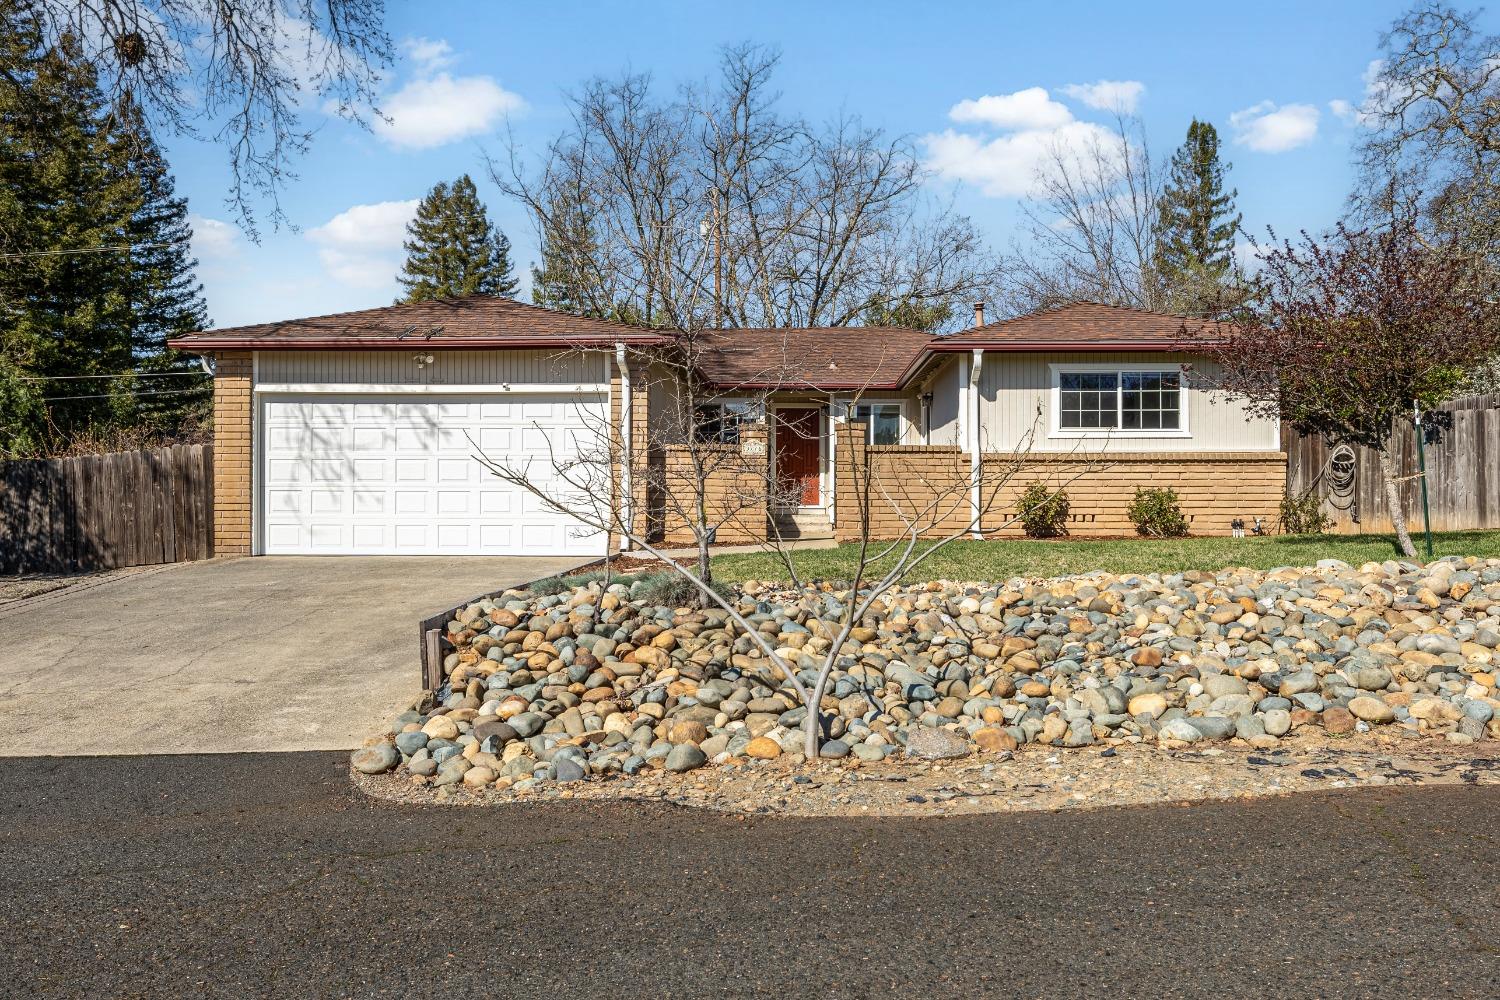 Photo of 3776 Archwood Rd in Cameron Park, CA